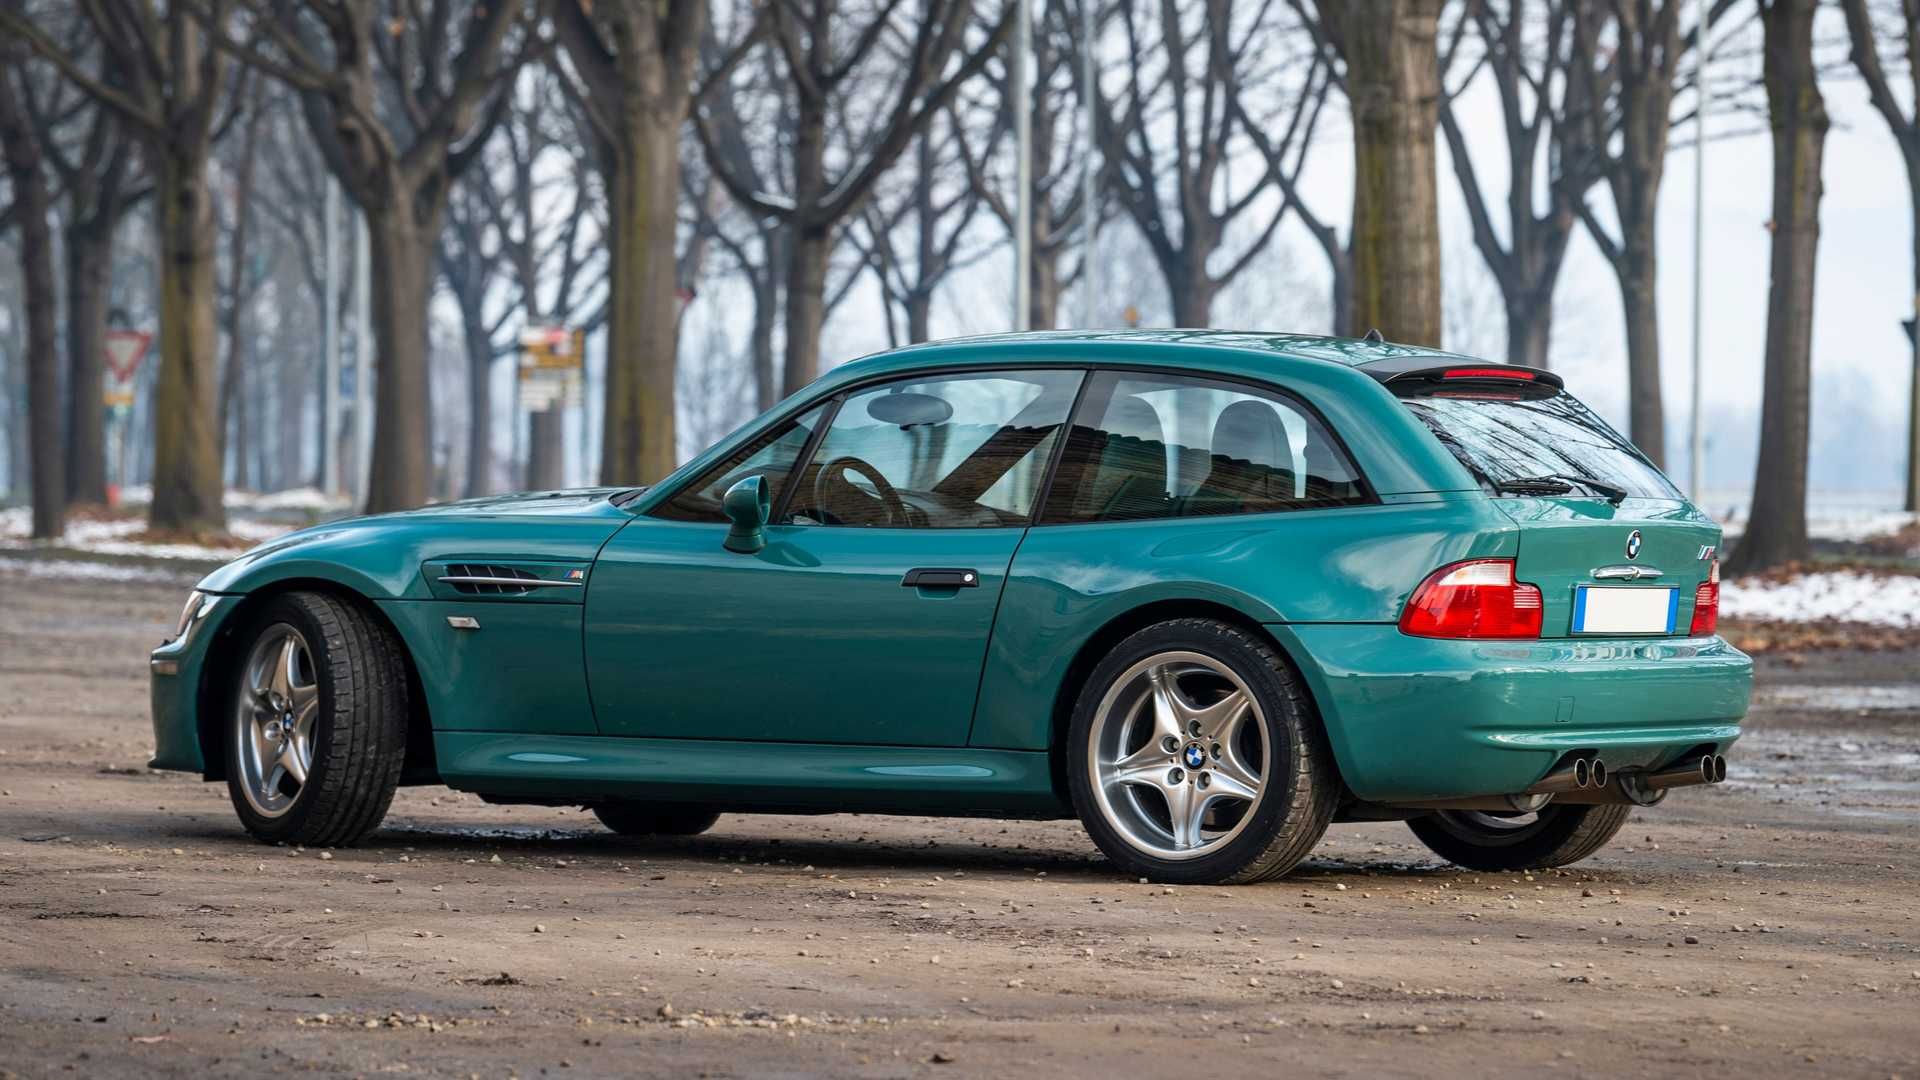 BMW Z3 M Coupe in green parked near trees